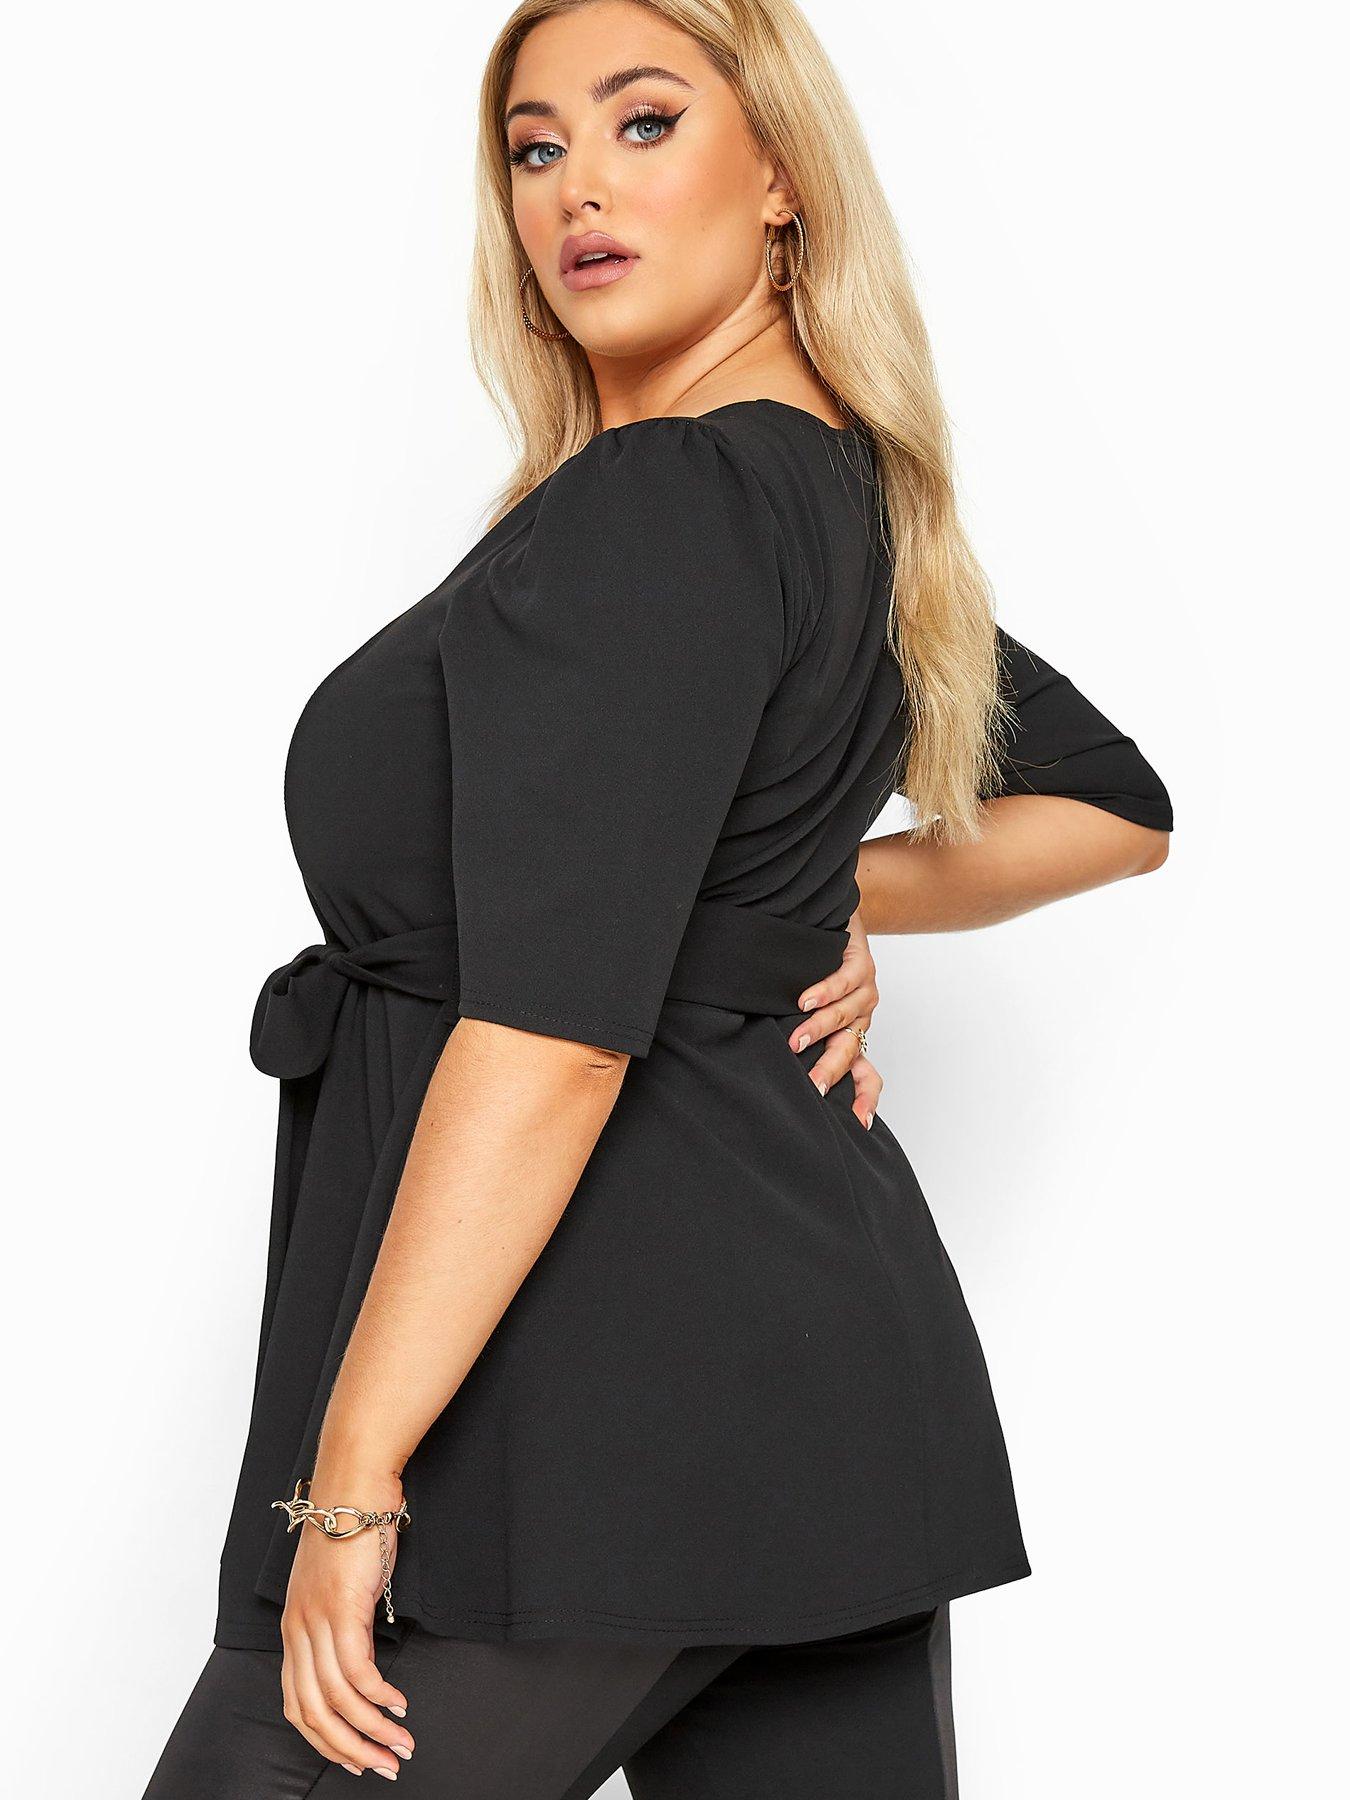  Yours London Notch Neck Belted Peplum Top - Black